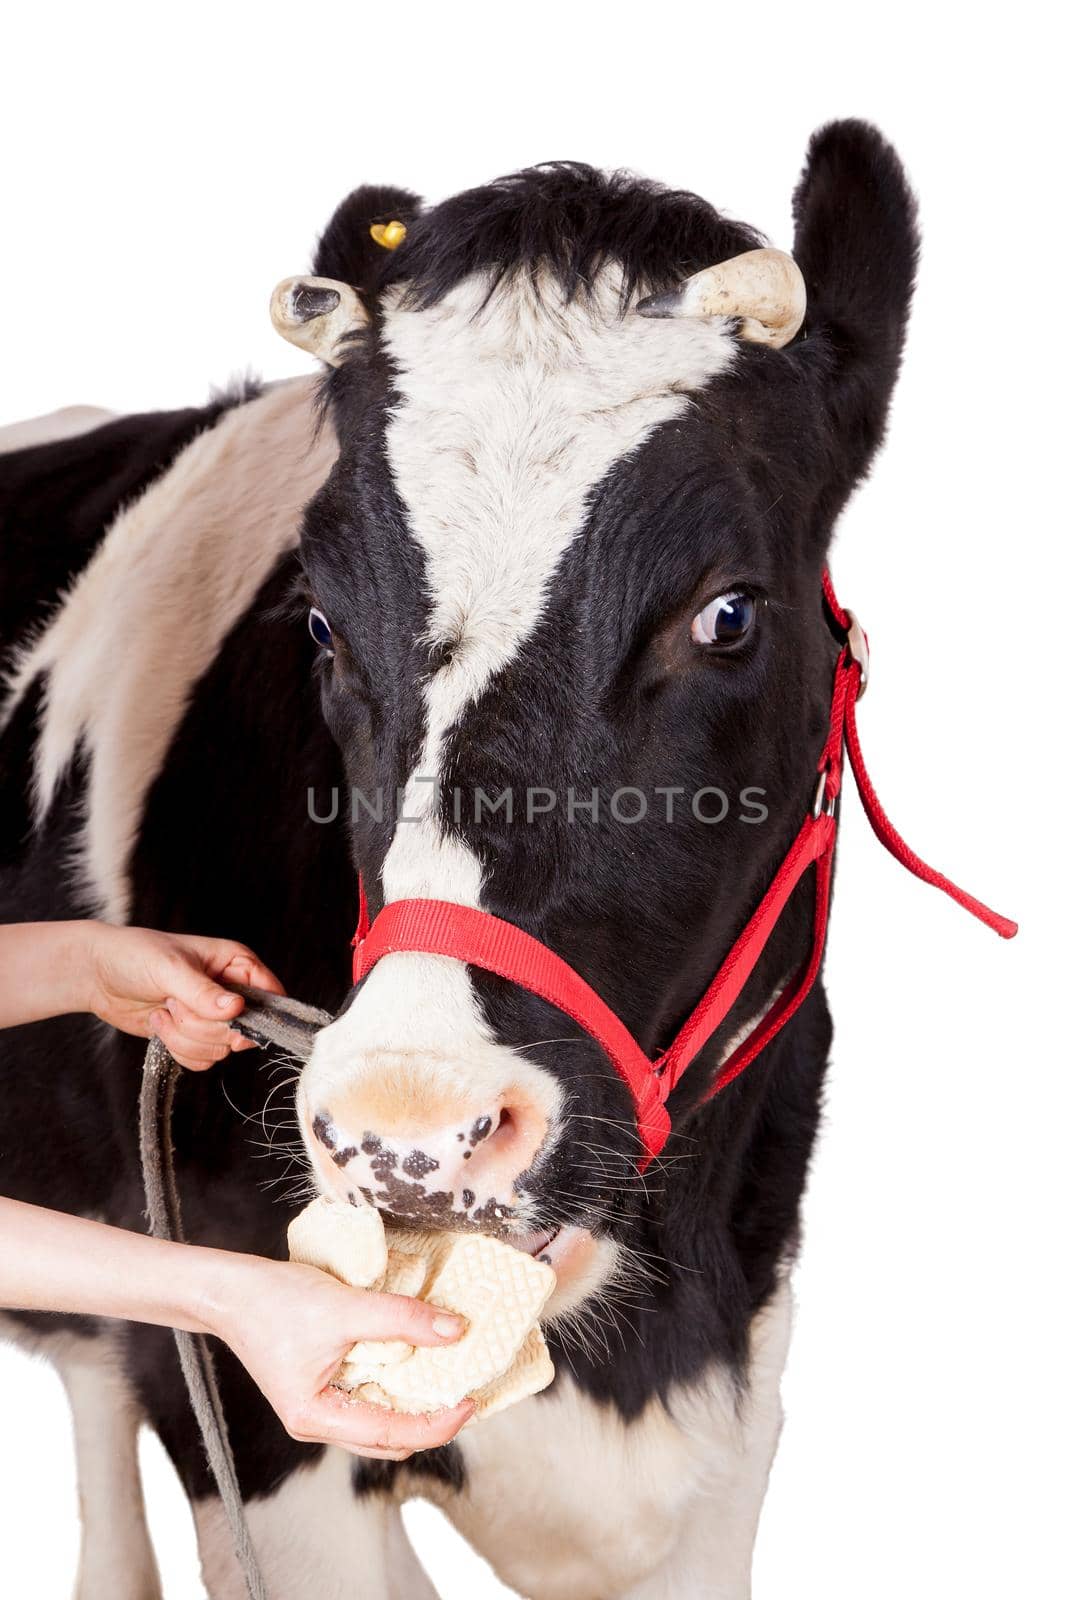 Scared Black and white cow Isolated On White background